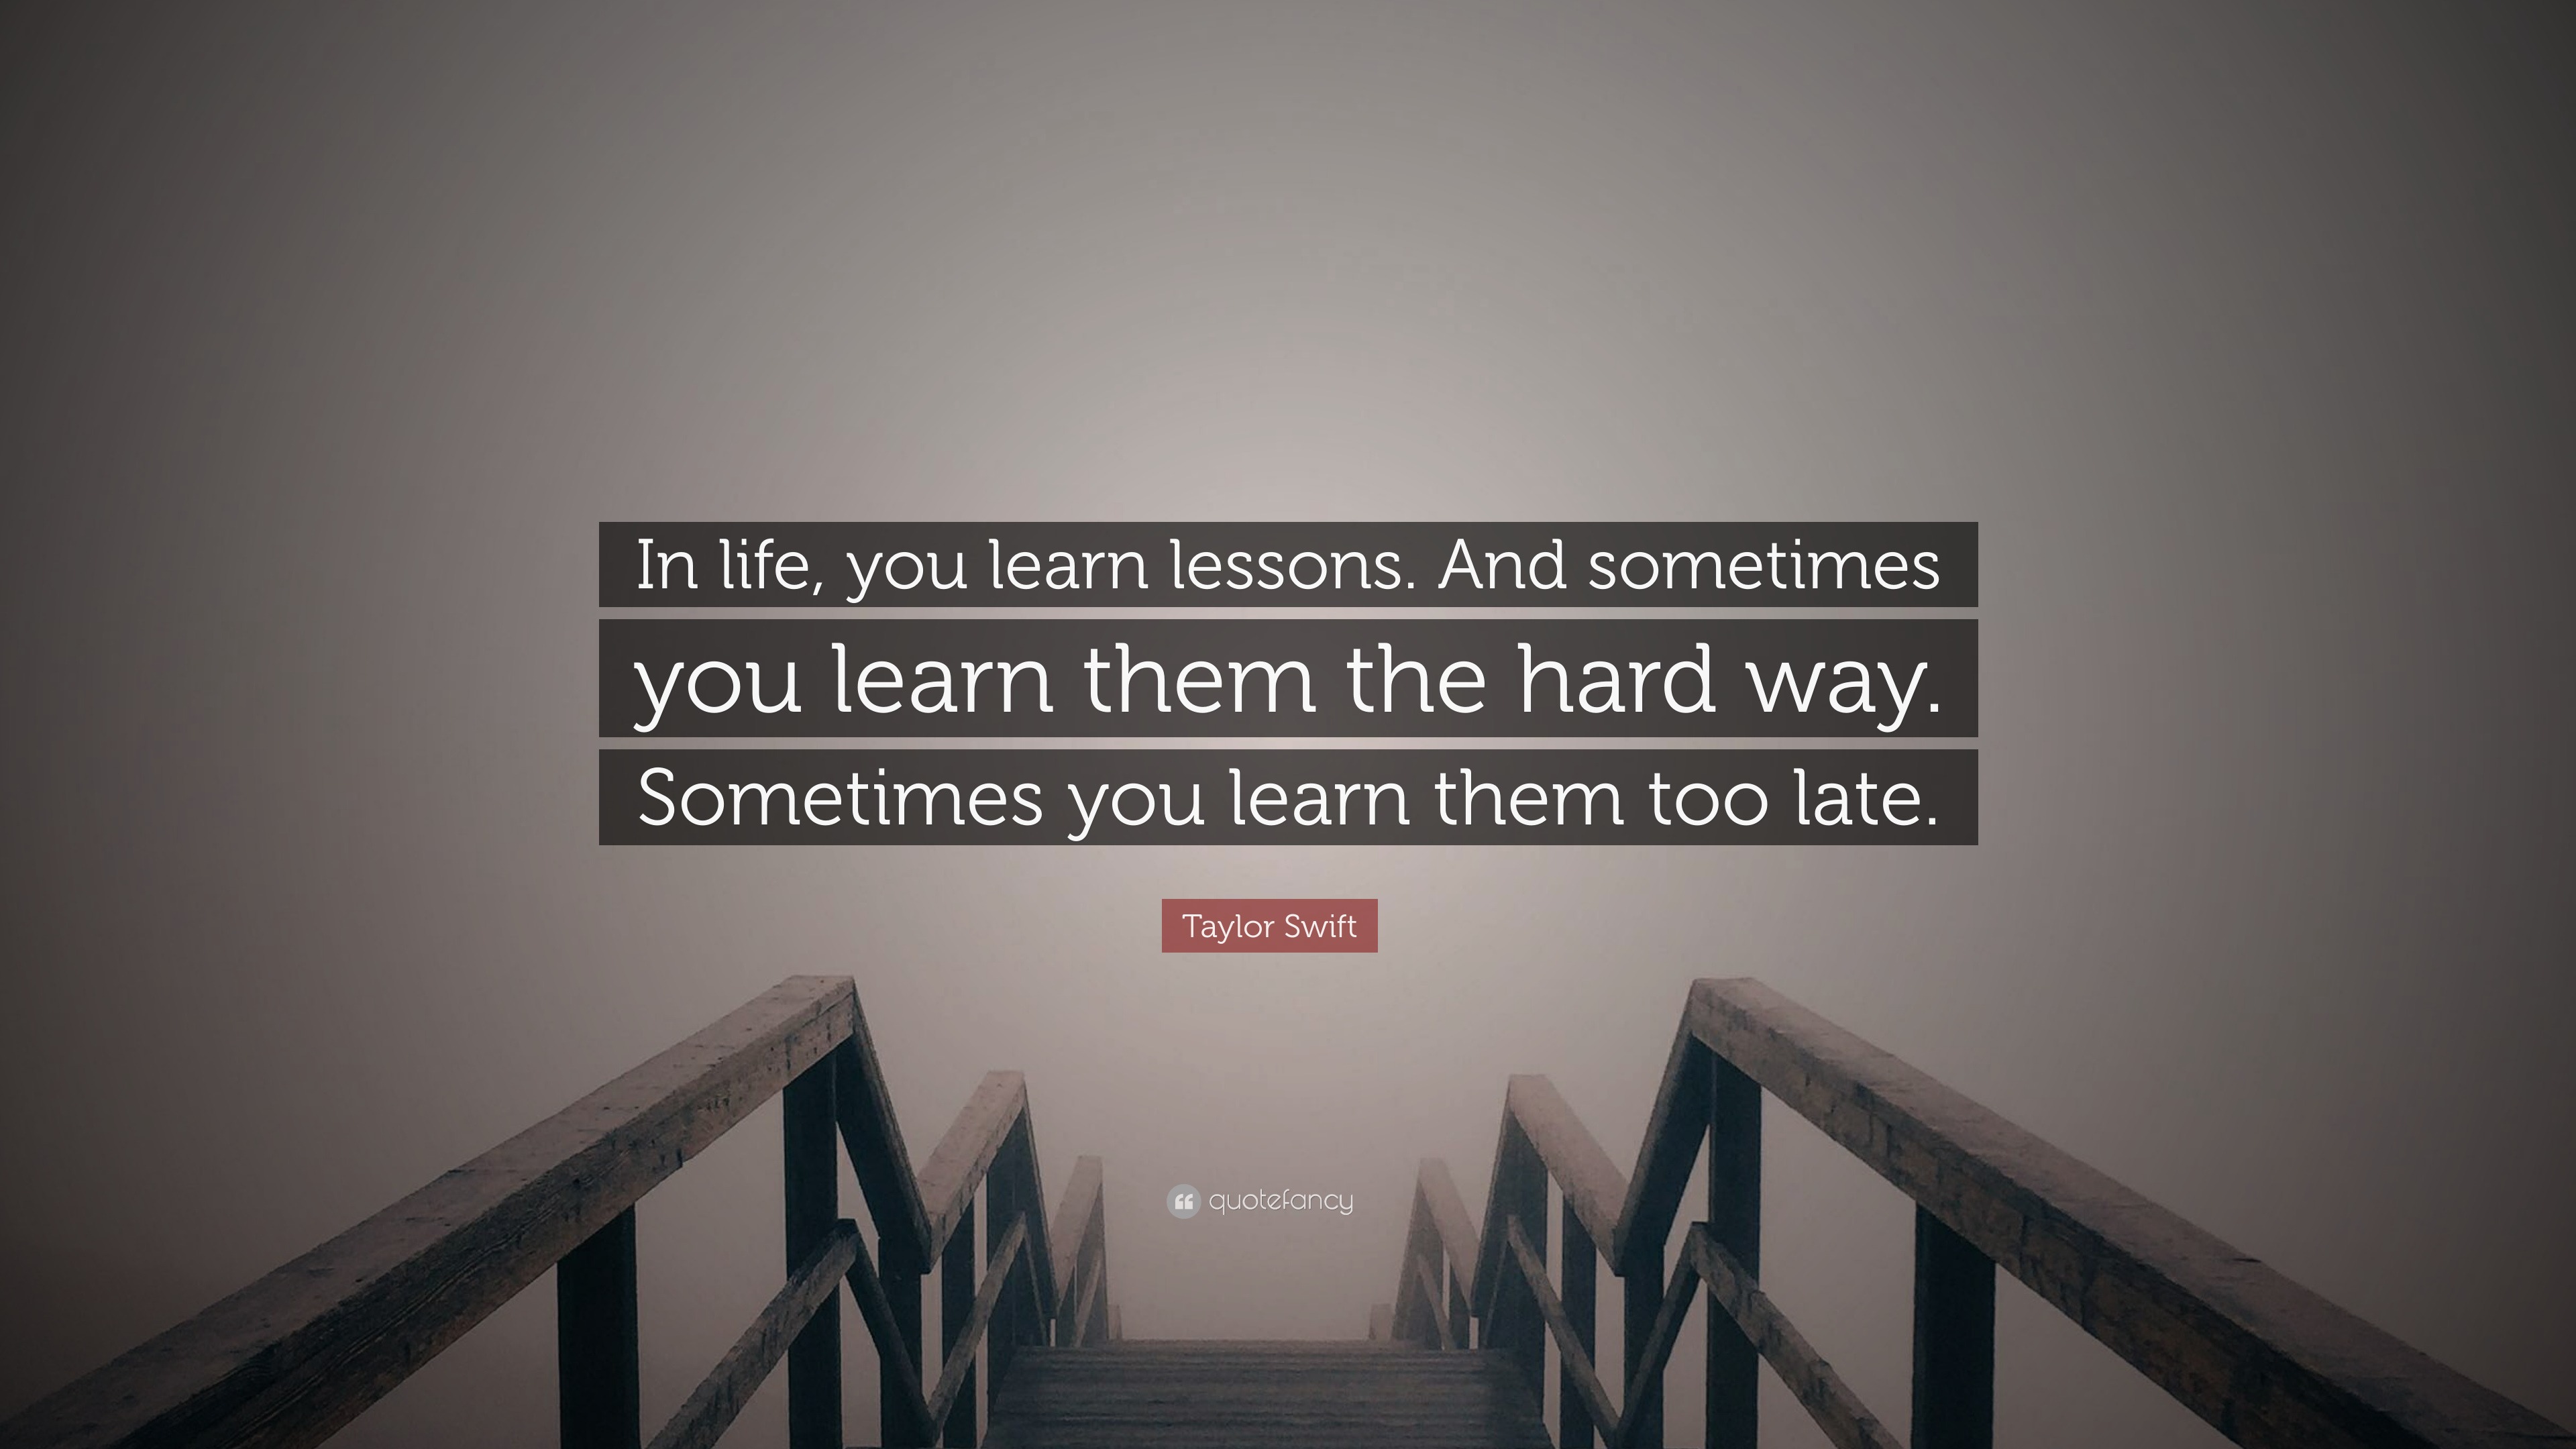 Life's lesson learned the hard way. It is freeing, however. Live